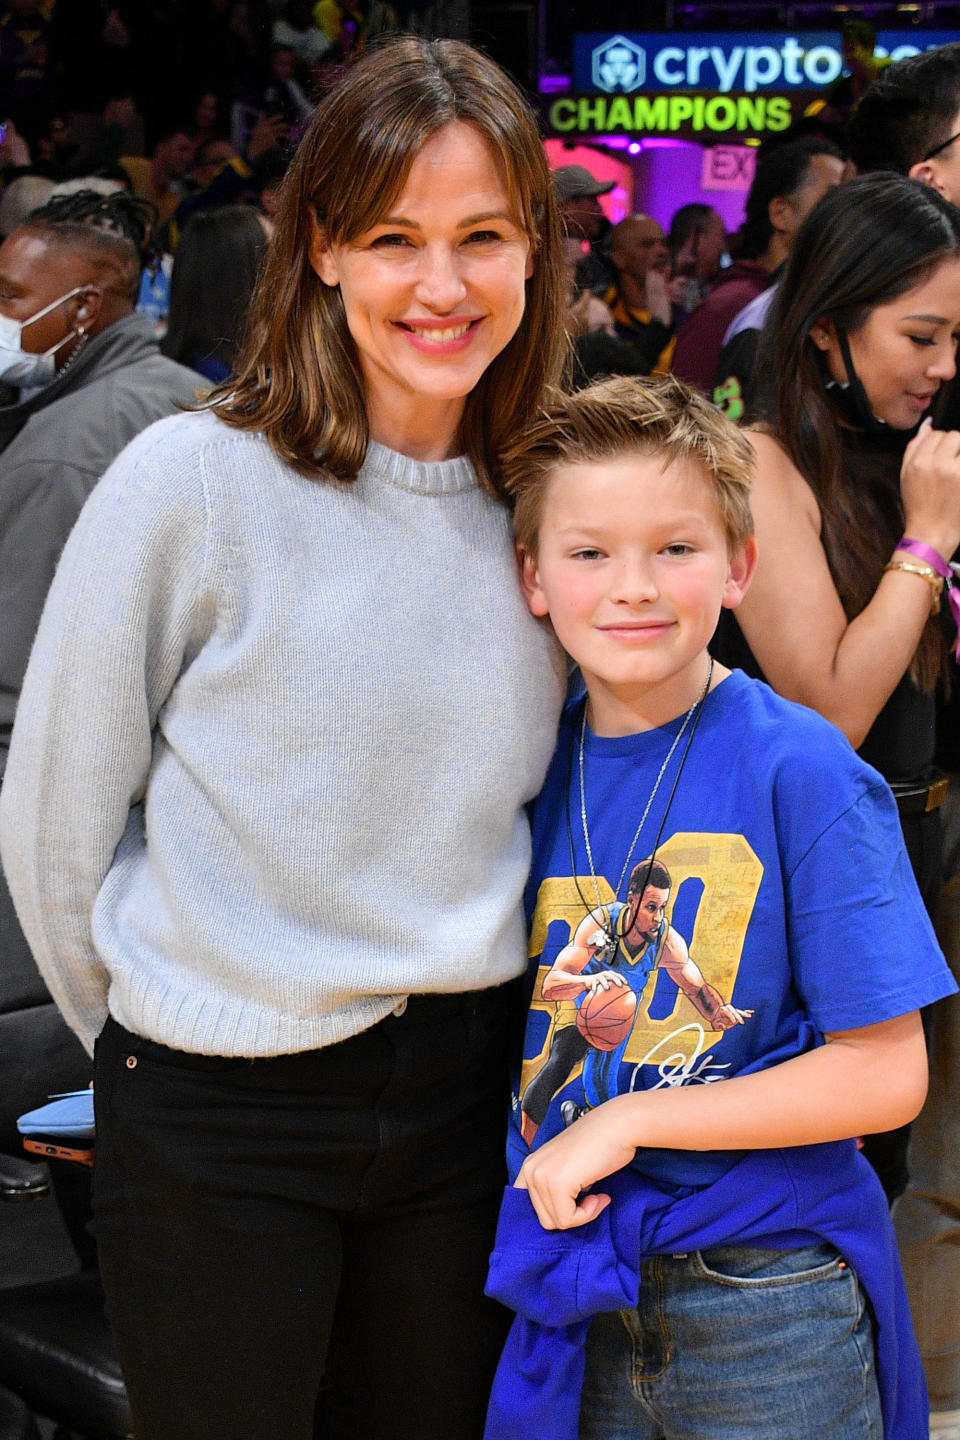 LOS ANGELES, CALIFORNIA - MARCH 05: Jennifer Garner and her son Samuel Garner Affleck attend a basketball game between the Los Angeles Lakers and the Golden State Warriors at Crypto.com Arena on March 05, 2023 in Los Angeles, California. (Photo by Allen Berezovsky/Getty Images)